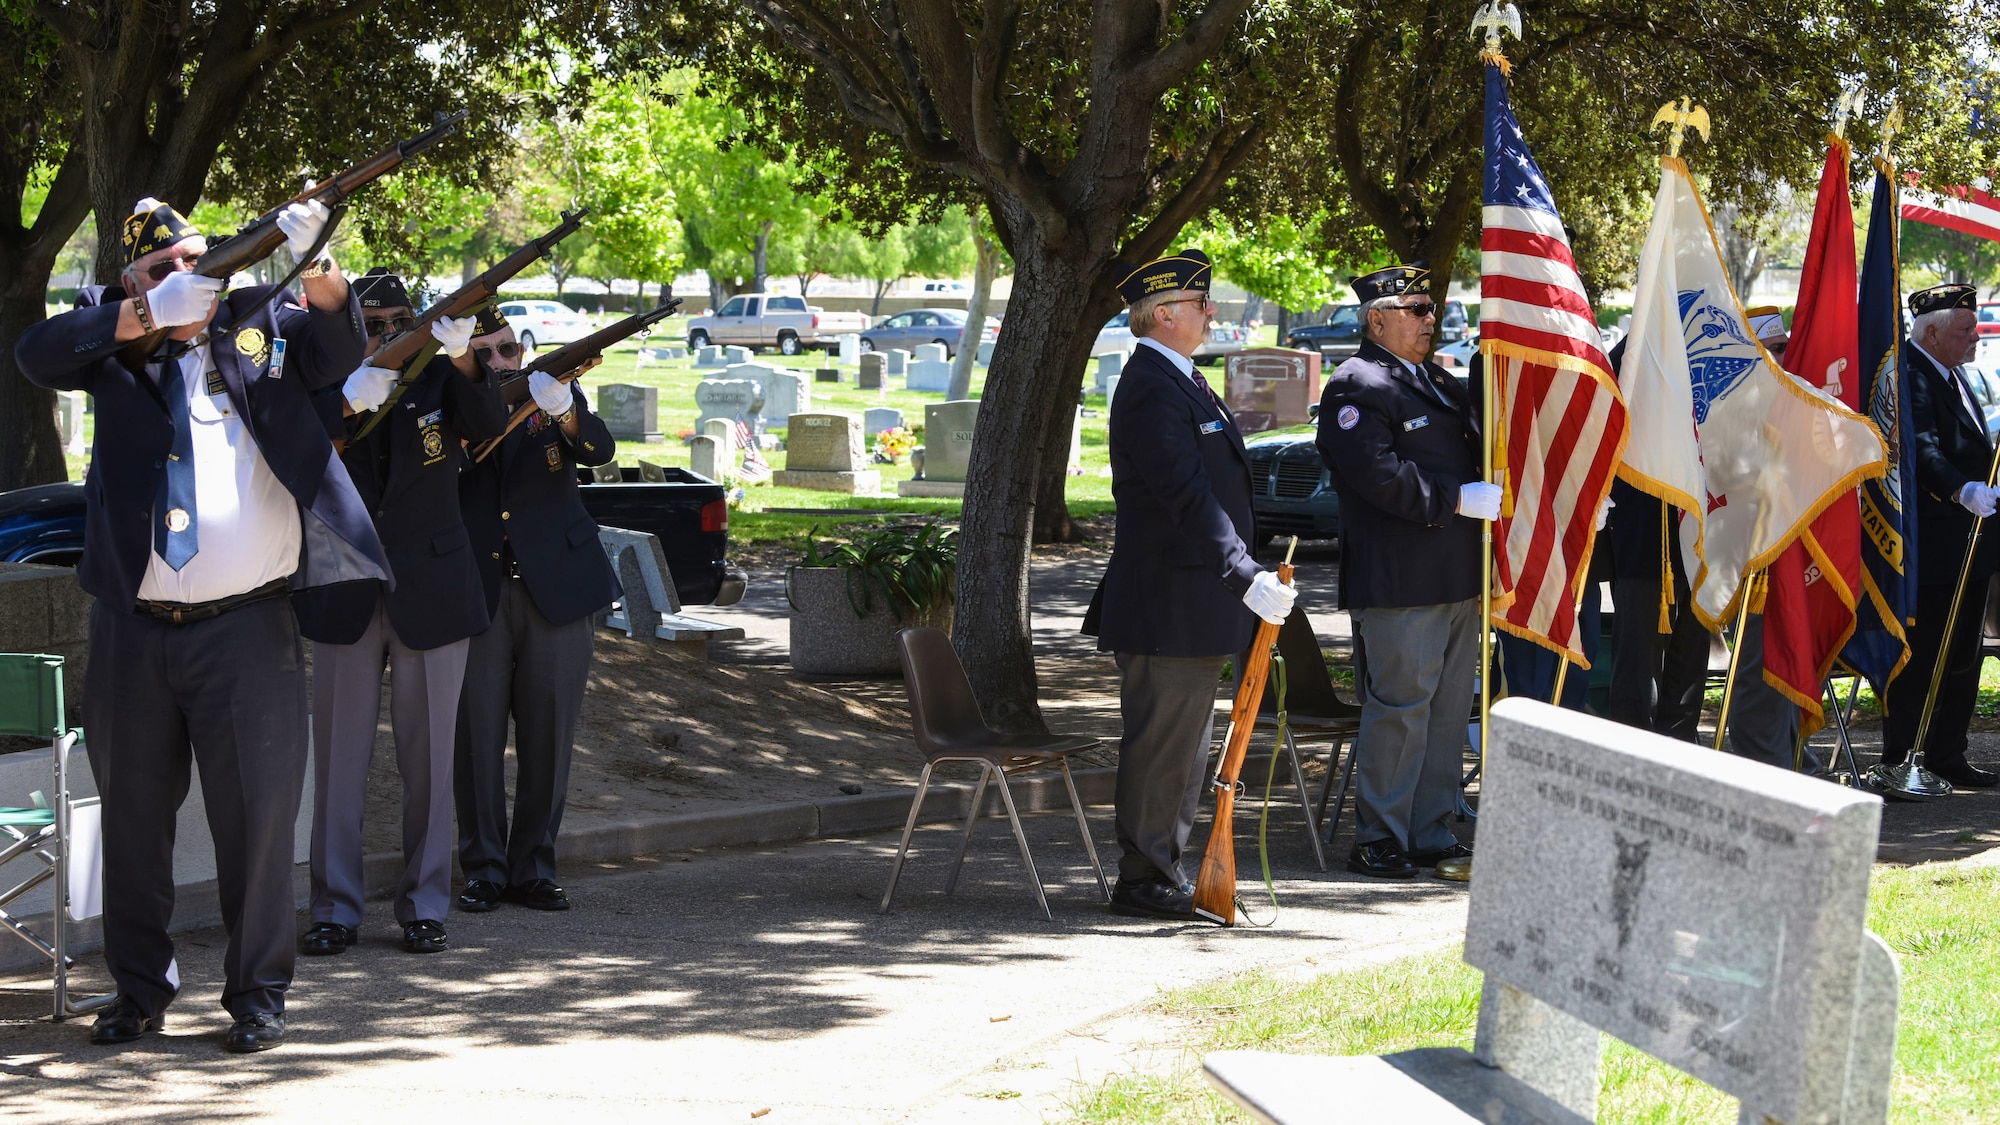 Members of the Santa Maria Valley Veteran Honor Guard shot a three-volley salute during a Memorial Day ceremony May 27, 2019, at the Santa Maria Cemetery, Calif. The three-volley salute is a ceremonial act that pays tribute to those who gave their life for their country. (U.S. Air Force photo by Airman 1st Class Aubree Milks)